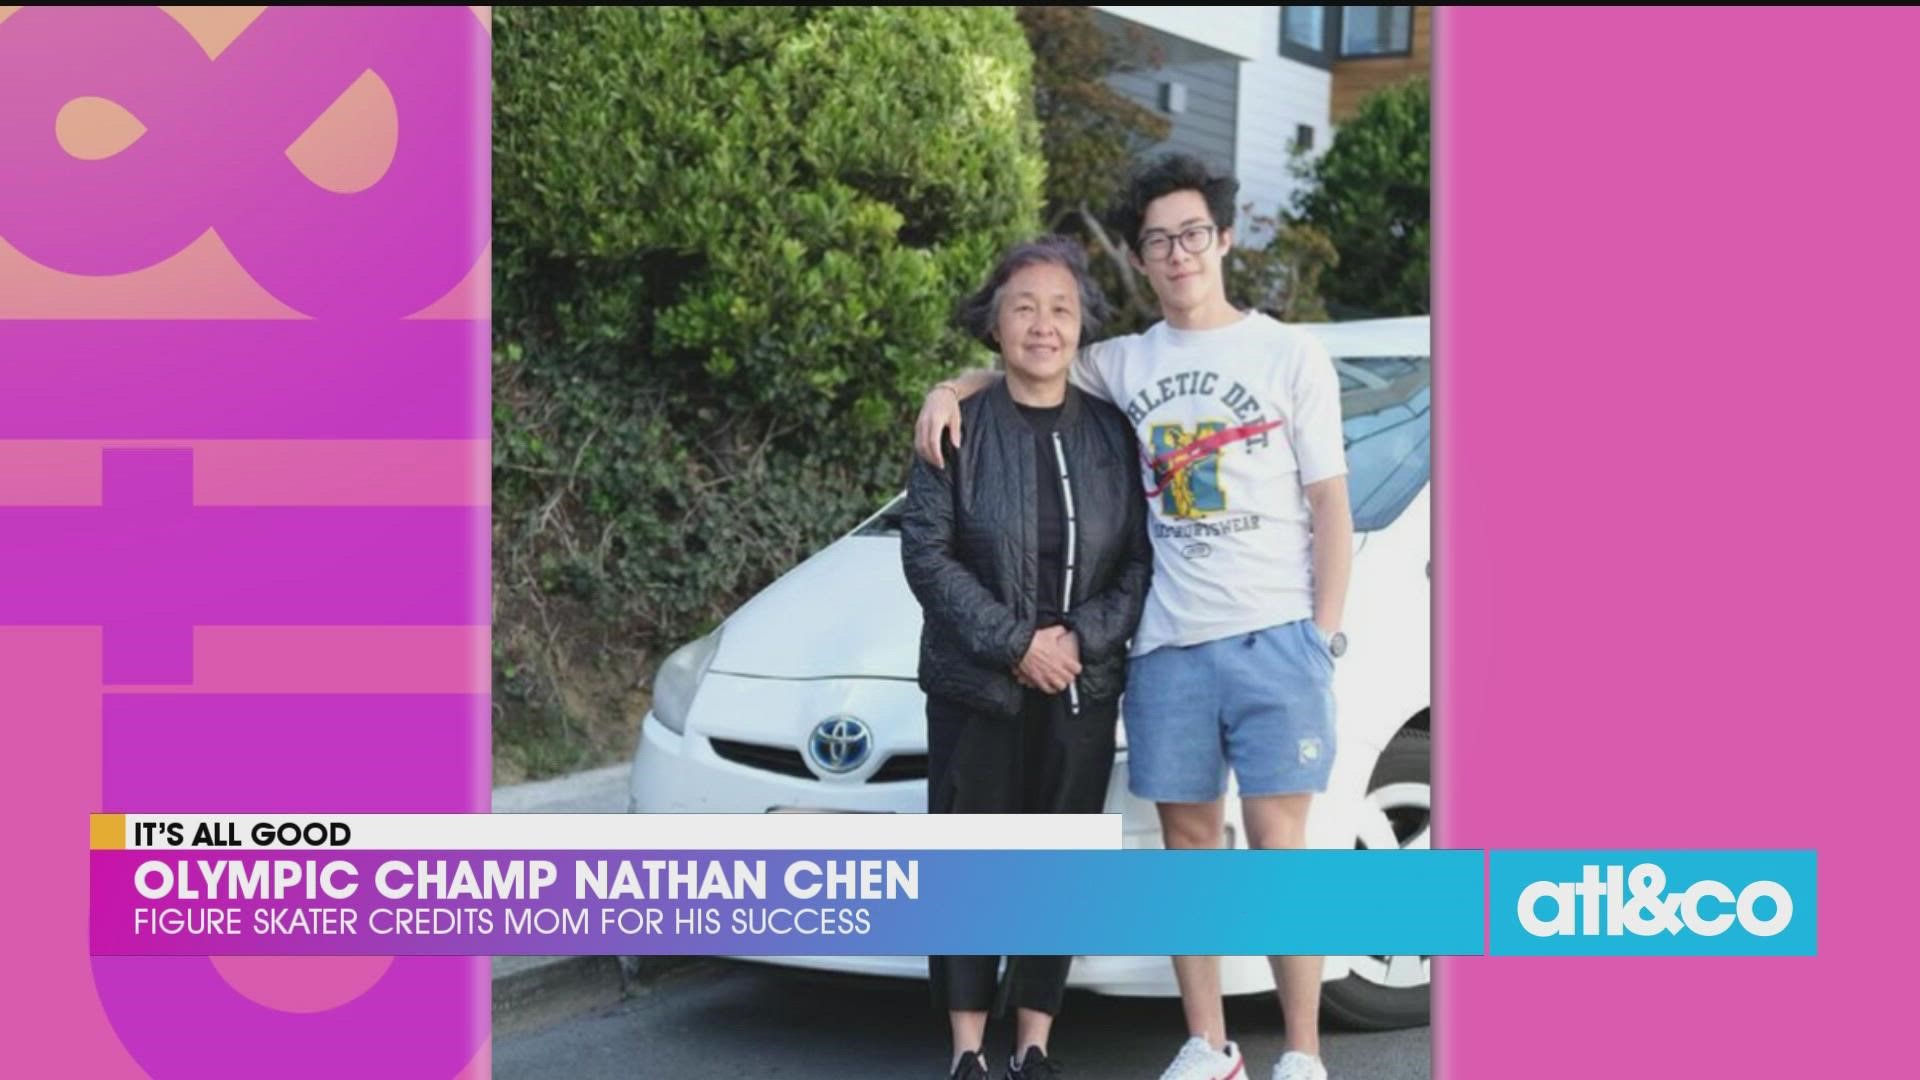 Congratulations to Nathan Chen on his gold medal victory. His mom and her trusty Prius were a huge part of his Olympics success.